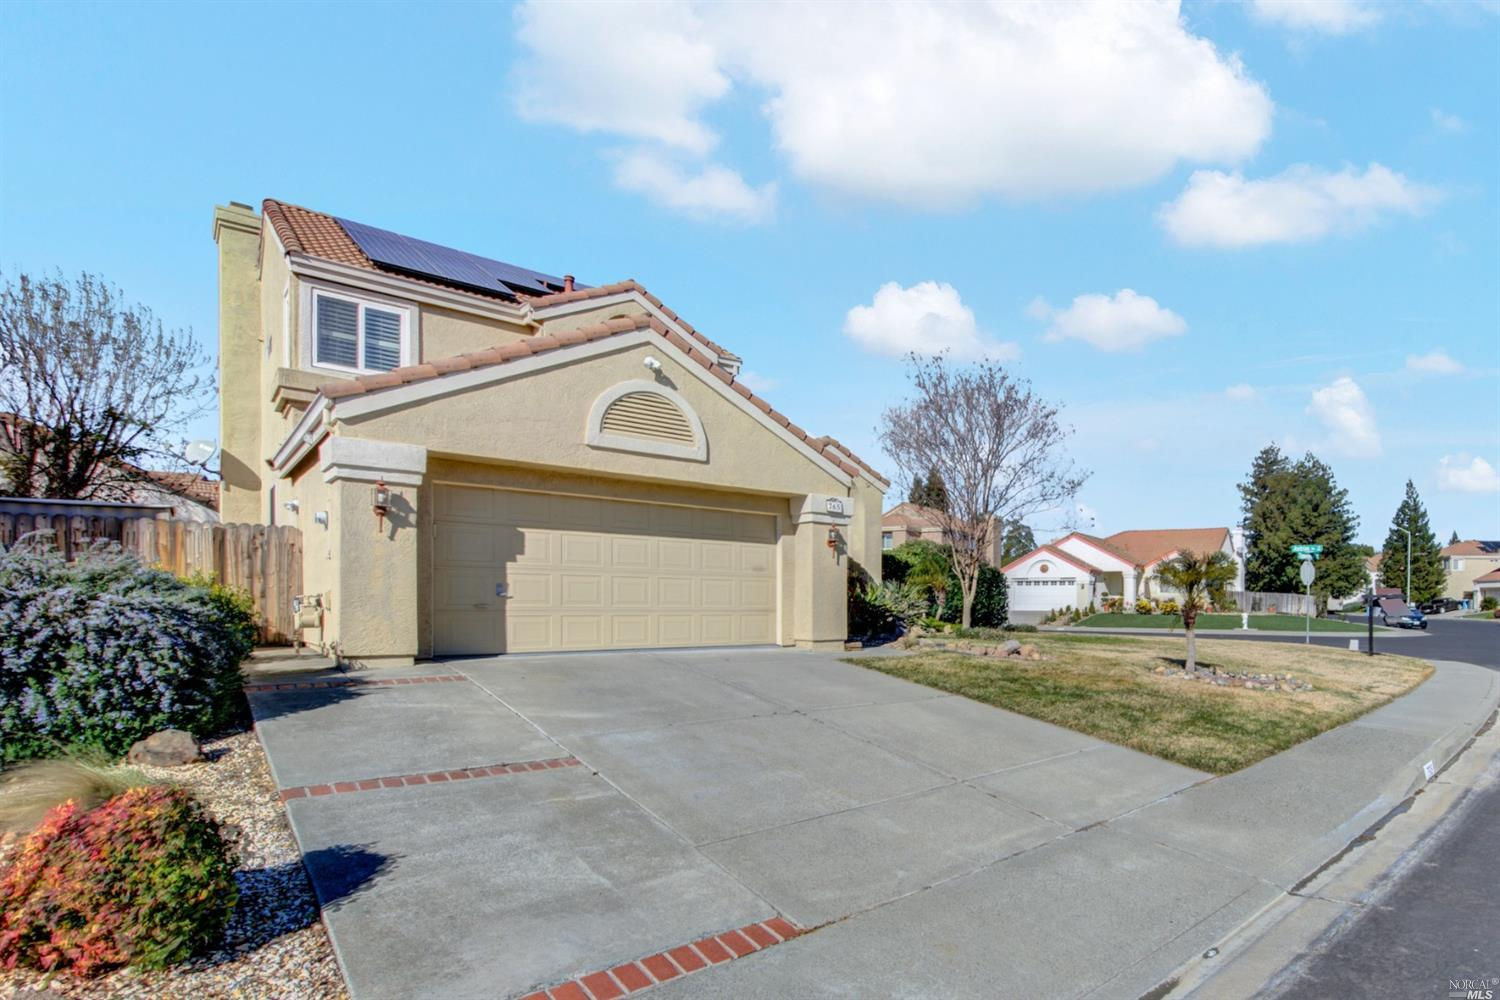 765 Tipperary Drive, Vacaville, CA 95688